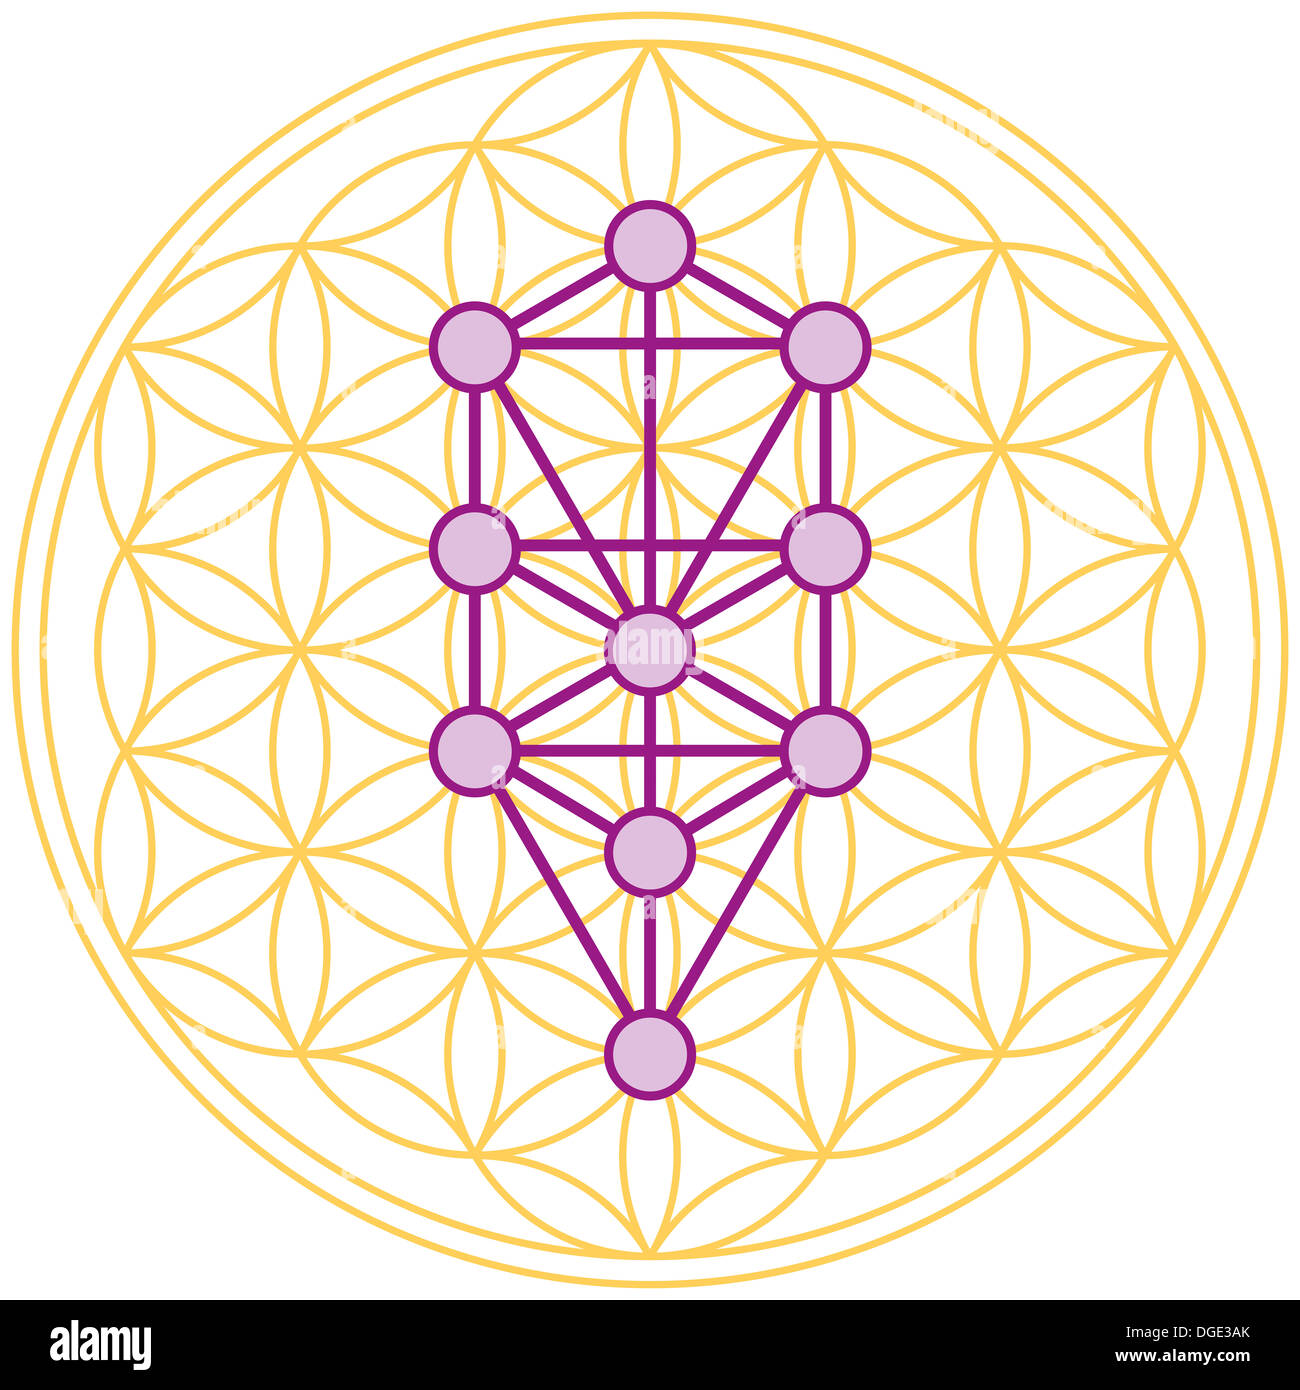 Tree Of Life Fits Perfect In The Flower Of Life Stock Photo